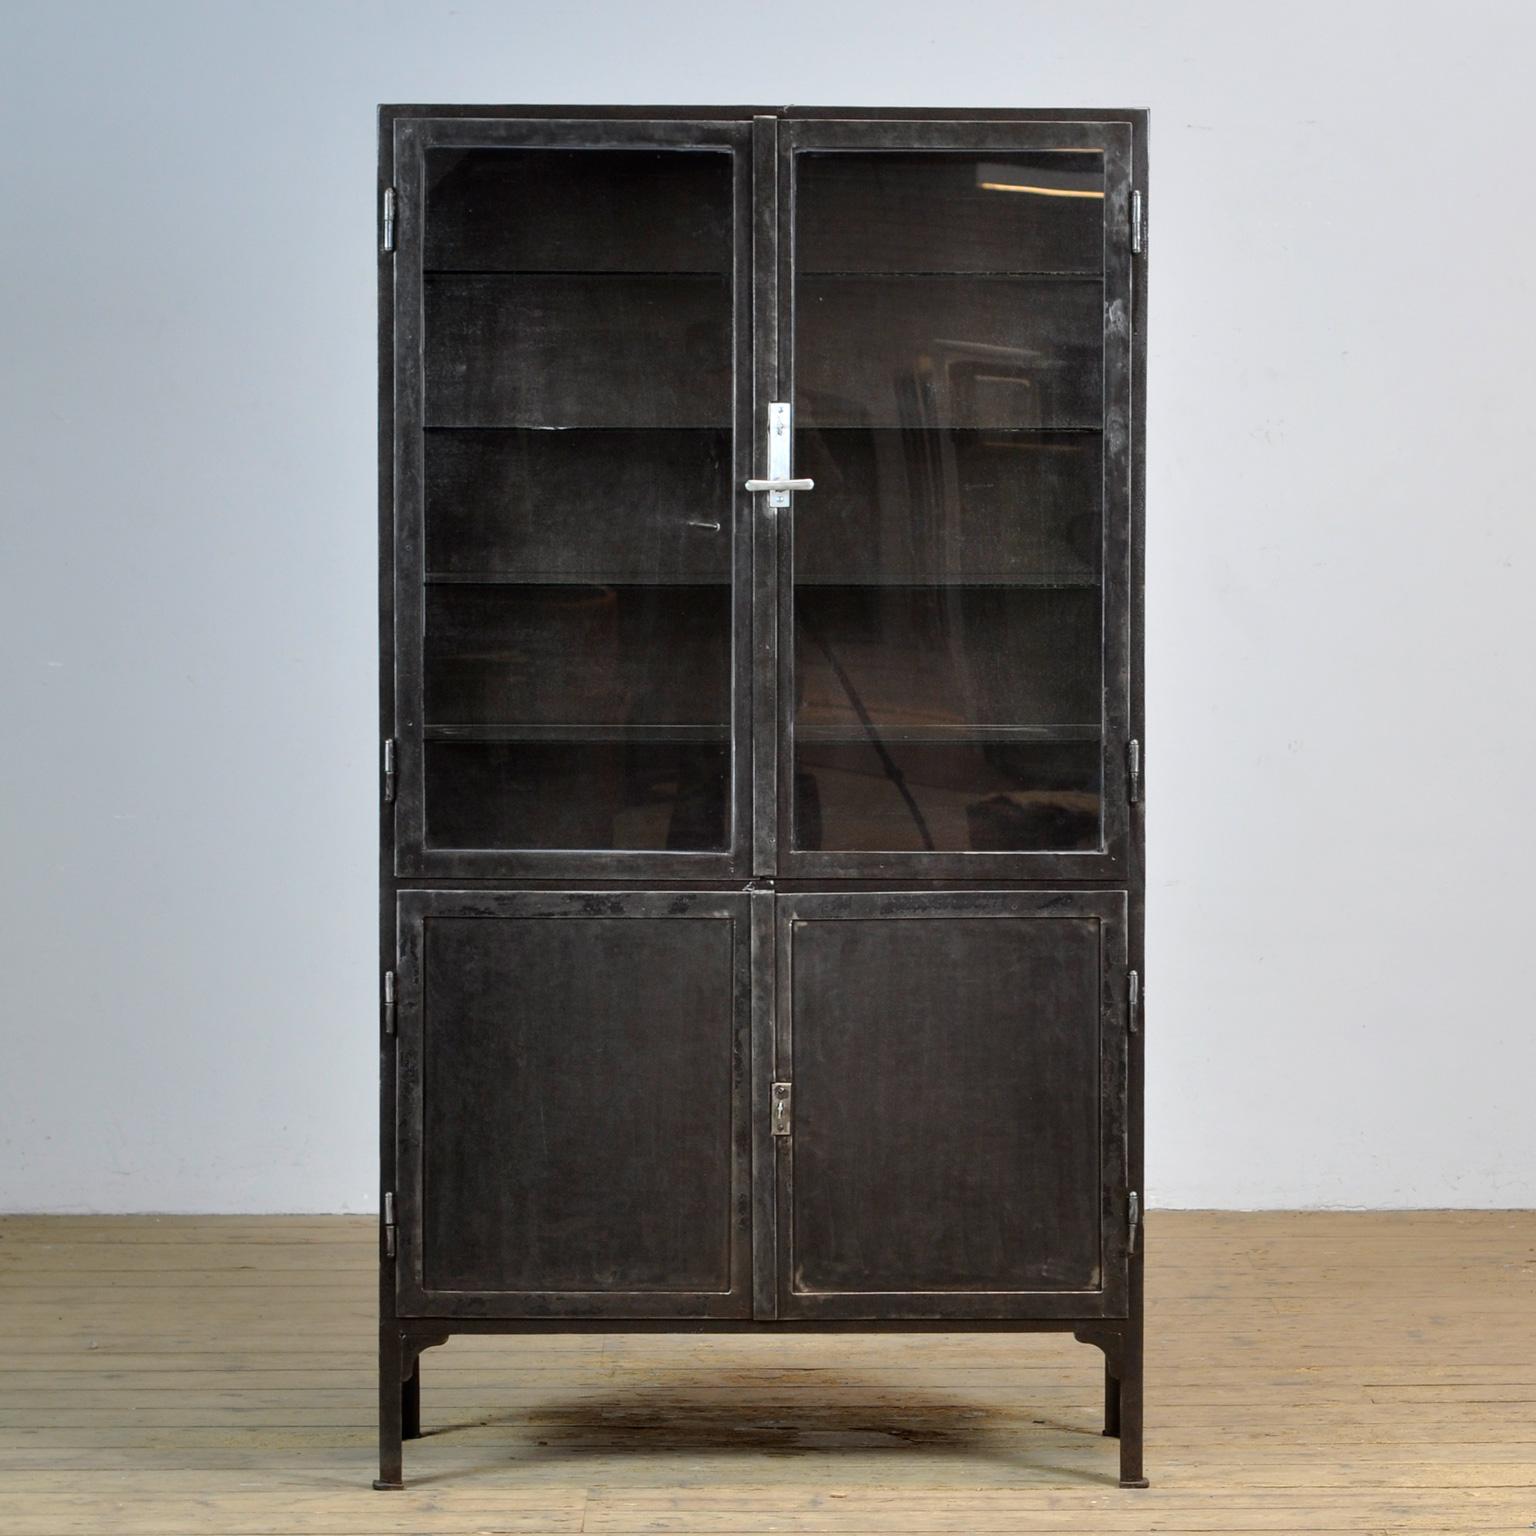 Medical cabinet from the 1930's. The cabinet is produced in Hungary and is made of thick iron and glass. The locks and handle are original and functional. The cabinet has been stripped to the metal and finished with a rust-resistant oil. The cabinet